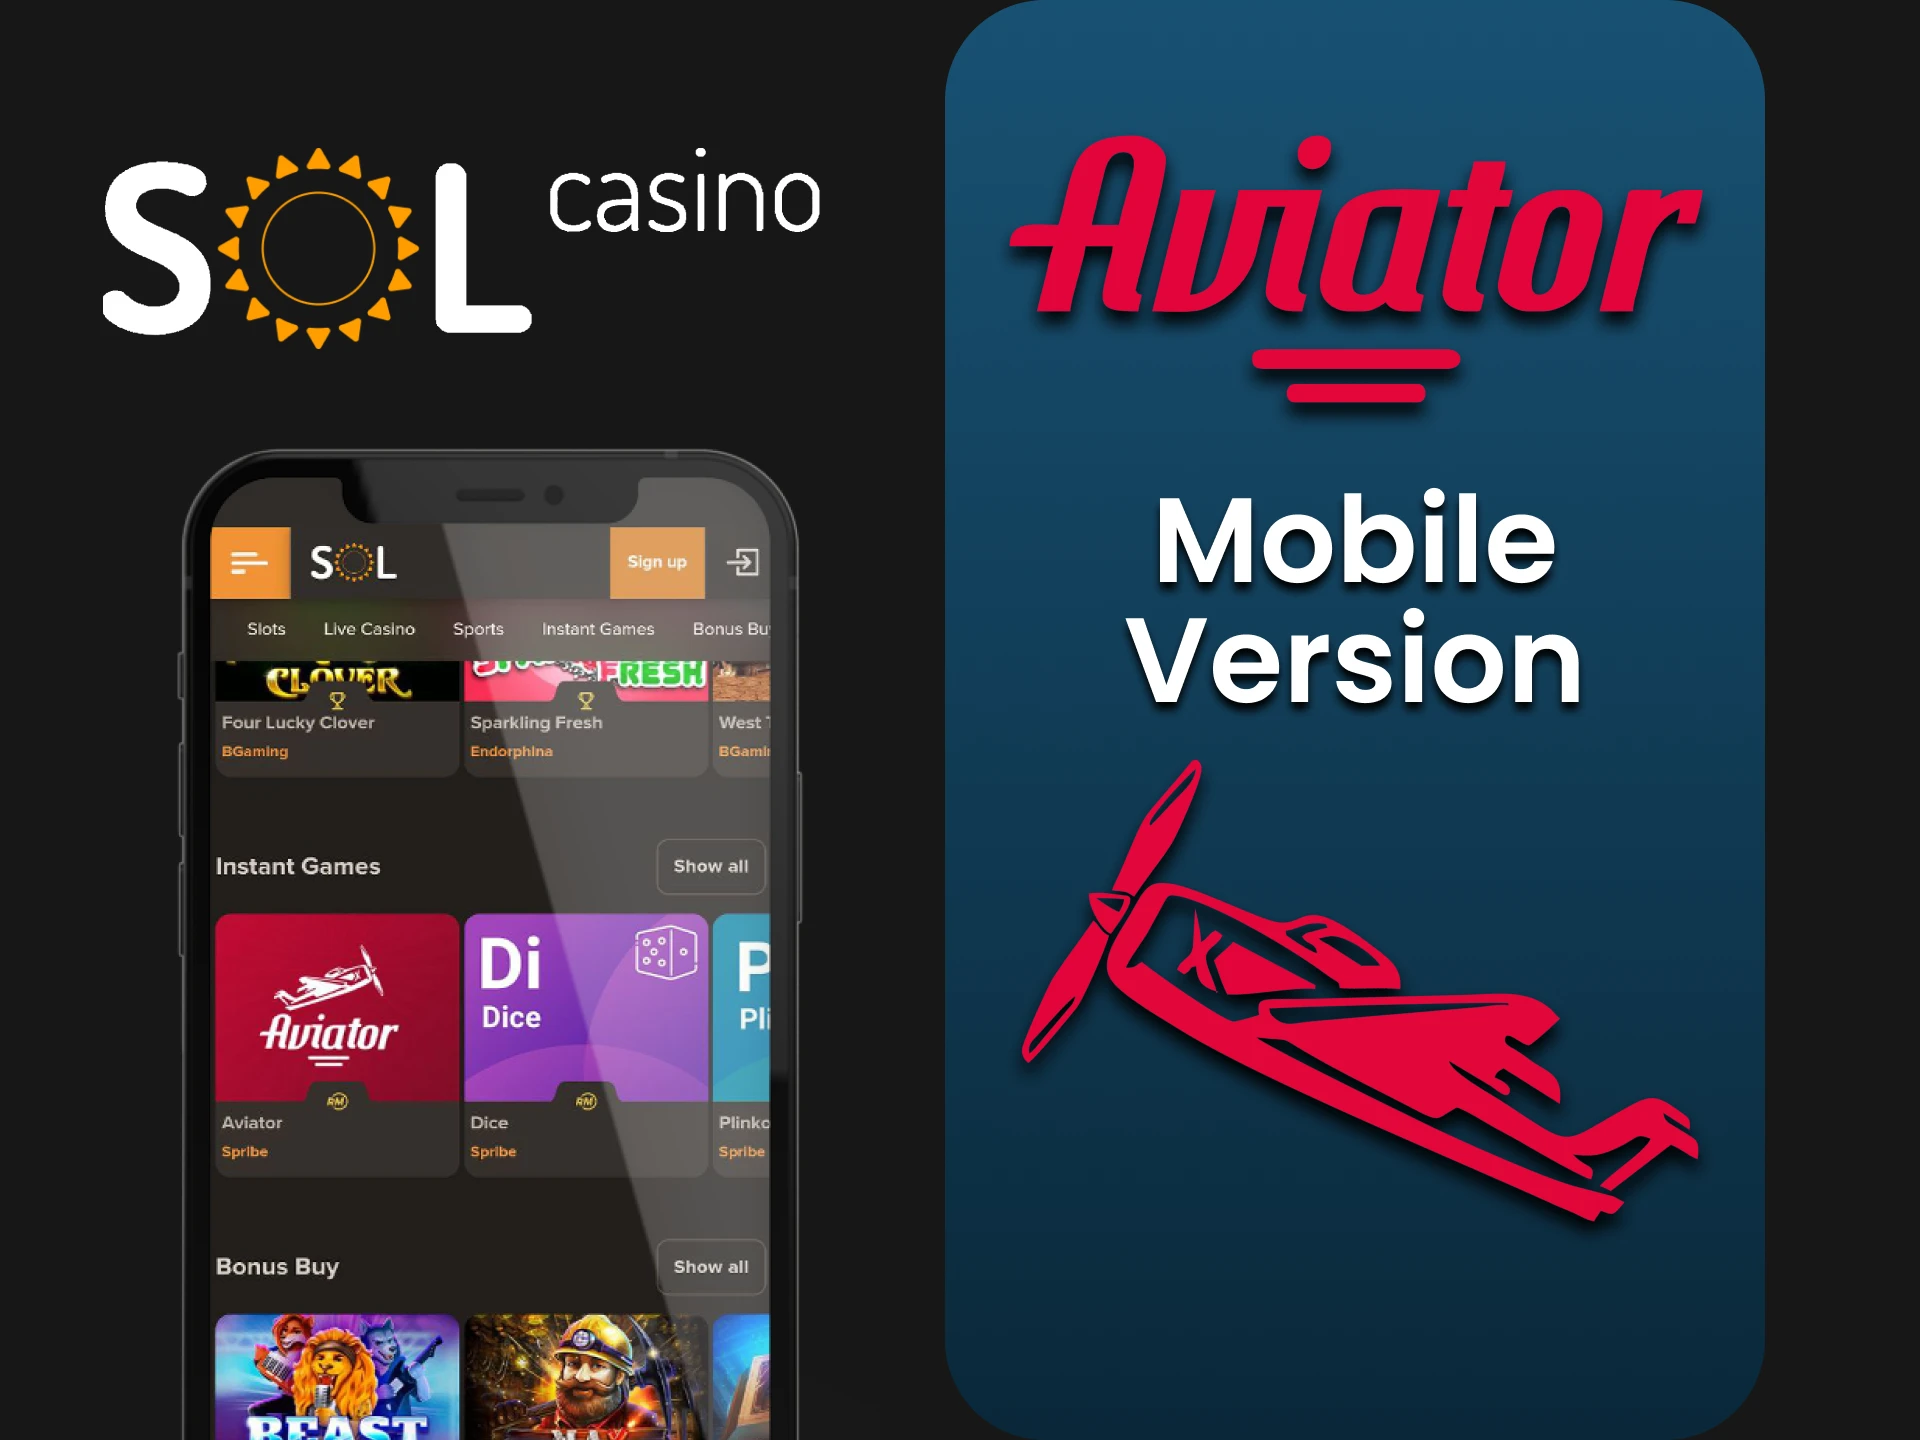 You can play Aviator through the mobile version on the Sol Casino website.